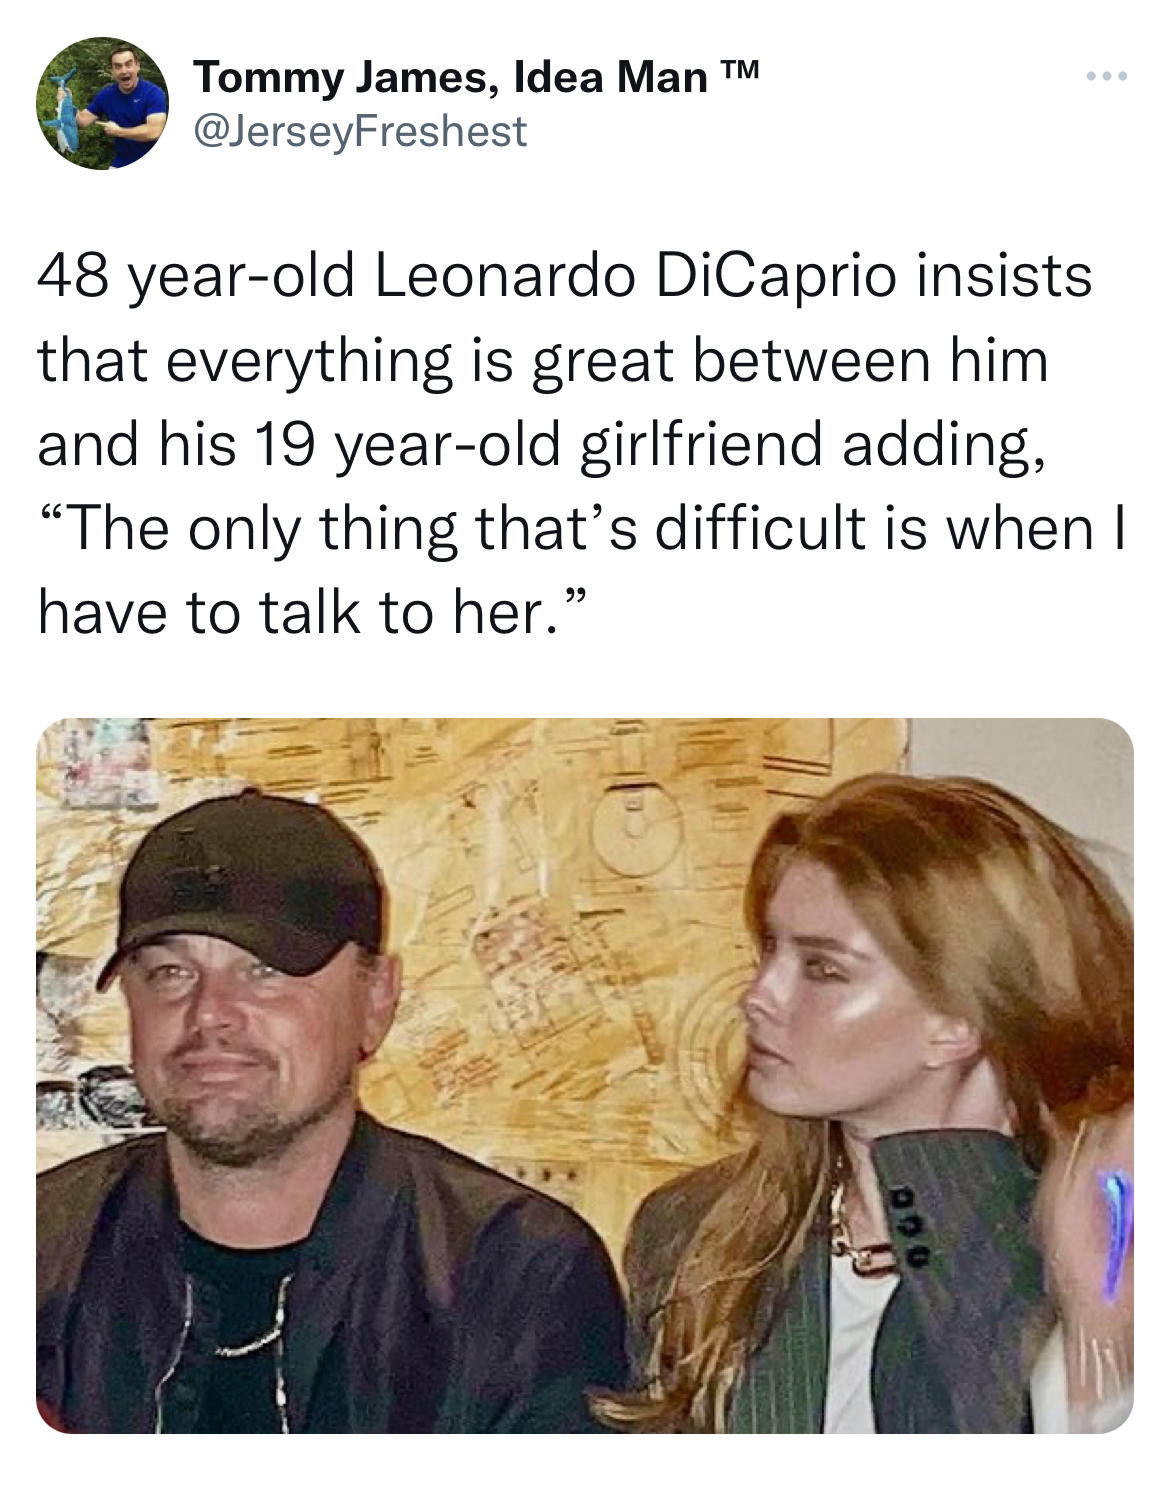 Leonardo DiCaprio Girlfriend Memes - Leonardo DiCaprio - Tommy James, Idea Man M 48 yearold Leonardo DiCaprio insists that everything is great between him and his 19 yearold girlfriend adding, "The only thing that's difficult is when I have to talk to her